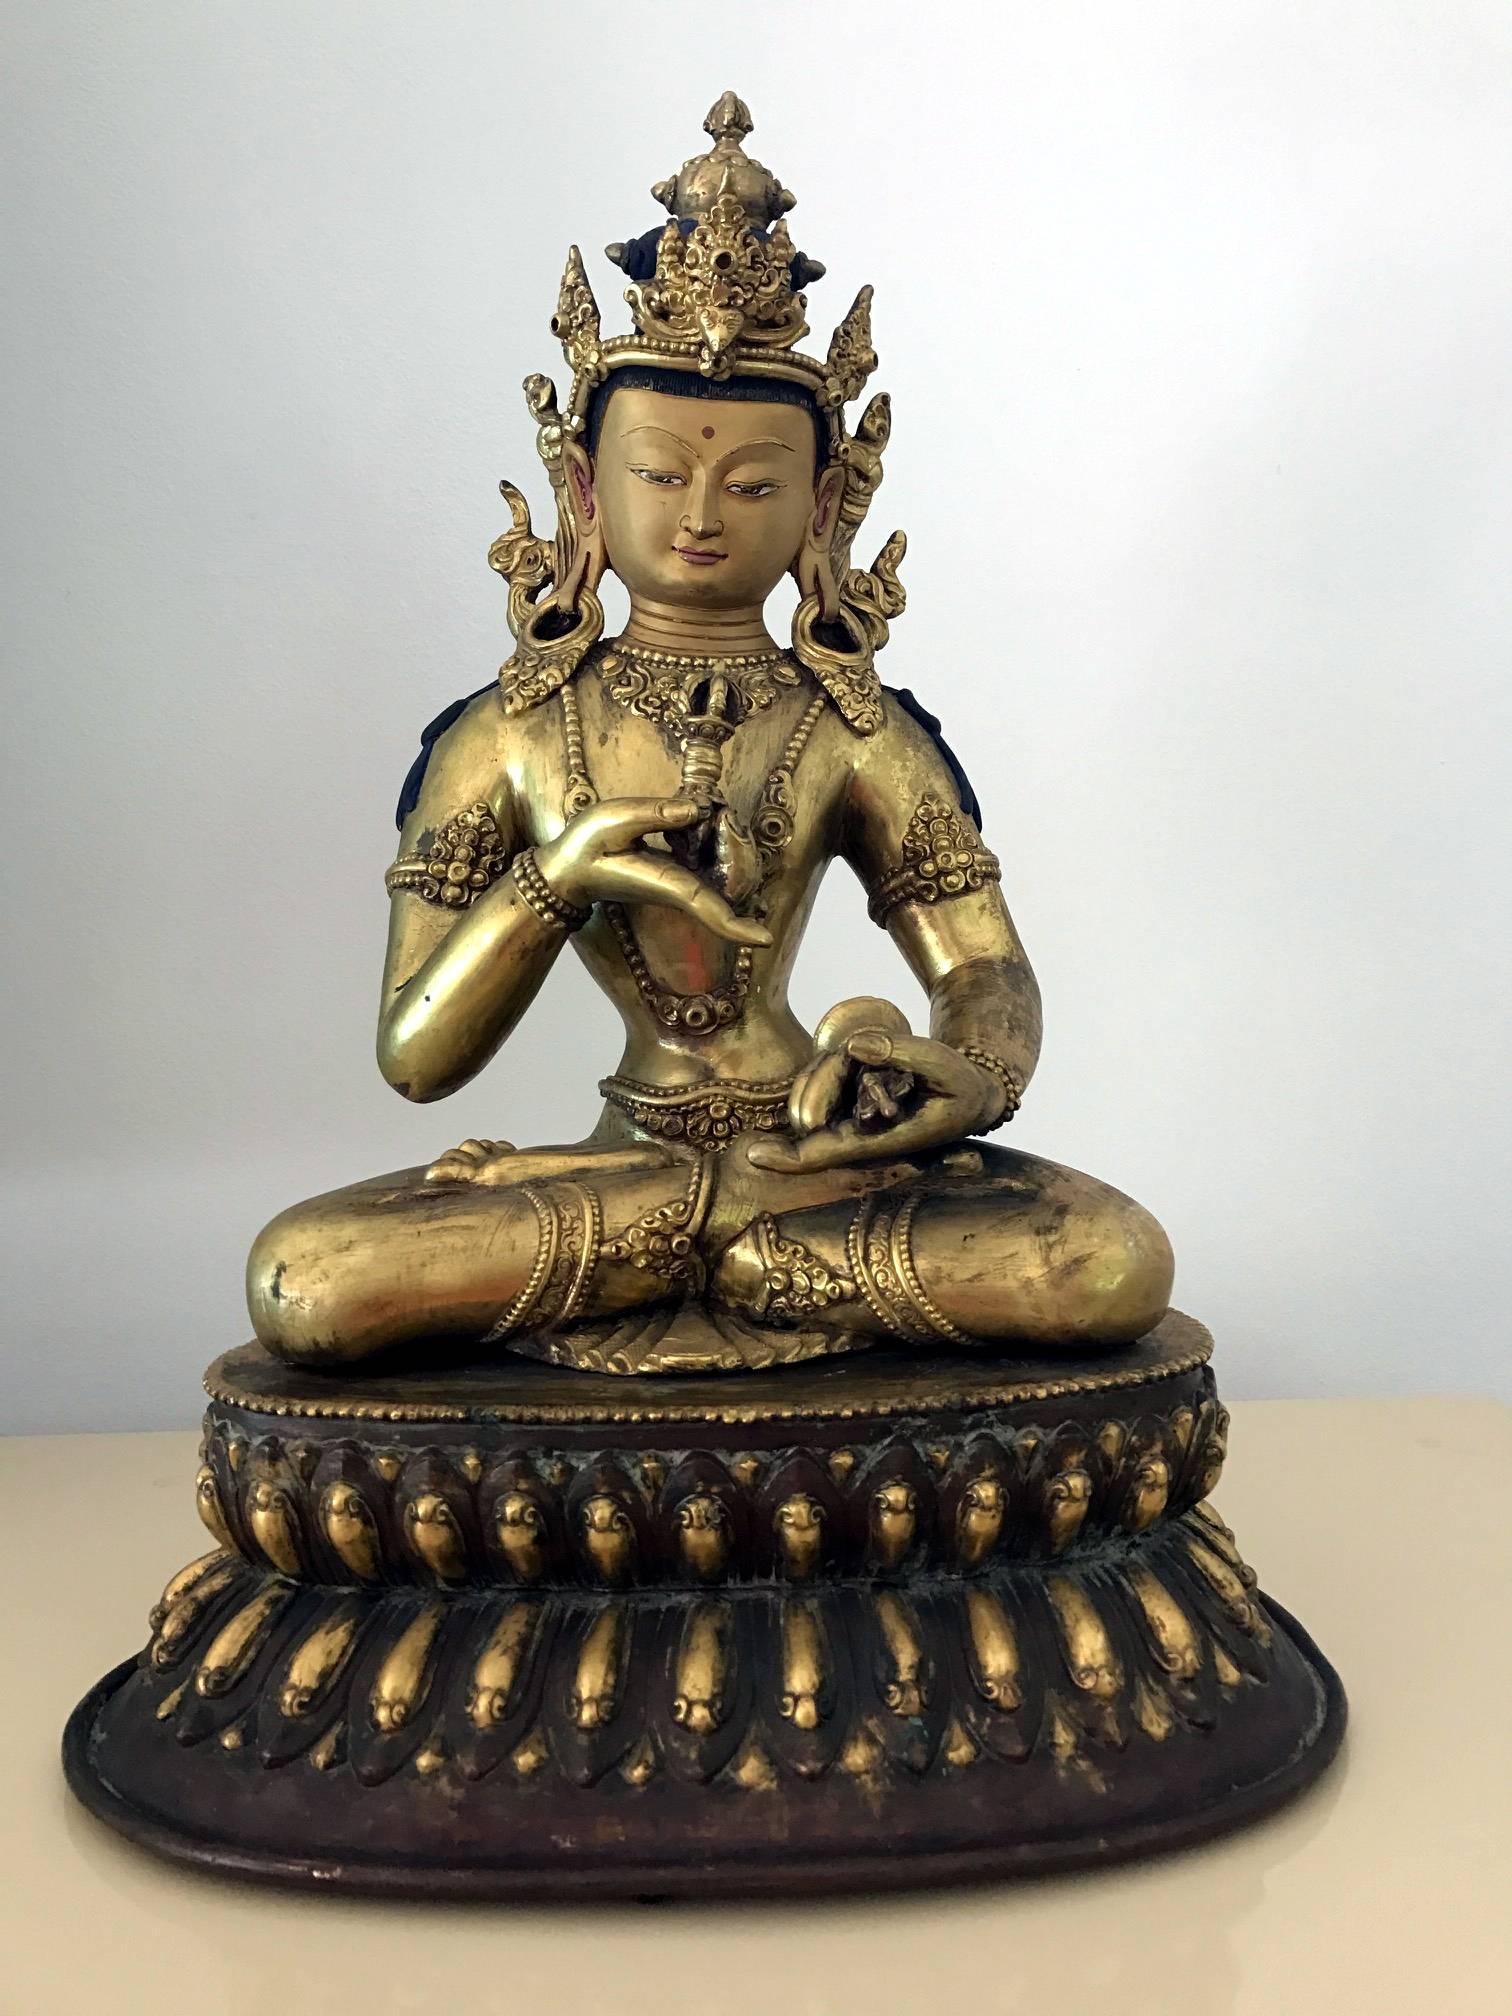 On offer is an impressively large and finely cast Sino-Tibetan gilt antiquebronze statue of Vajrasattva Bodhisattva, circa 19th century maybe earlier. The deity is depicted seating in the lotus position in his full bejeweled attire with an ornate